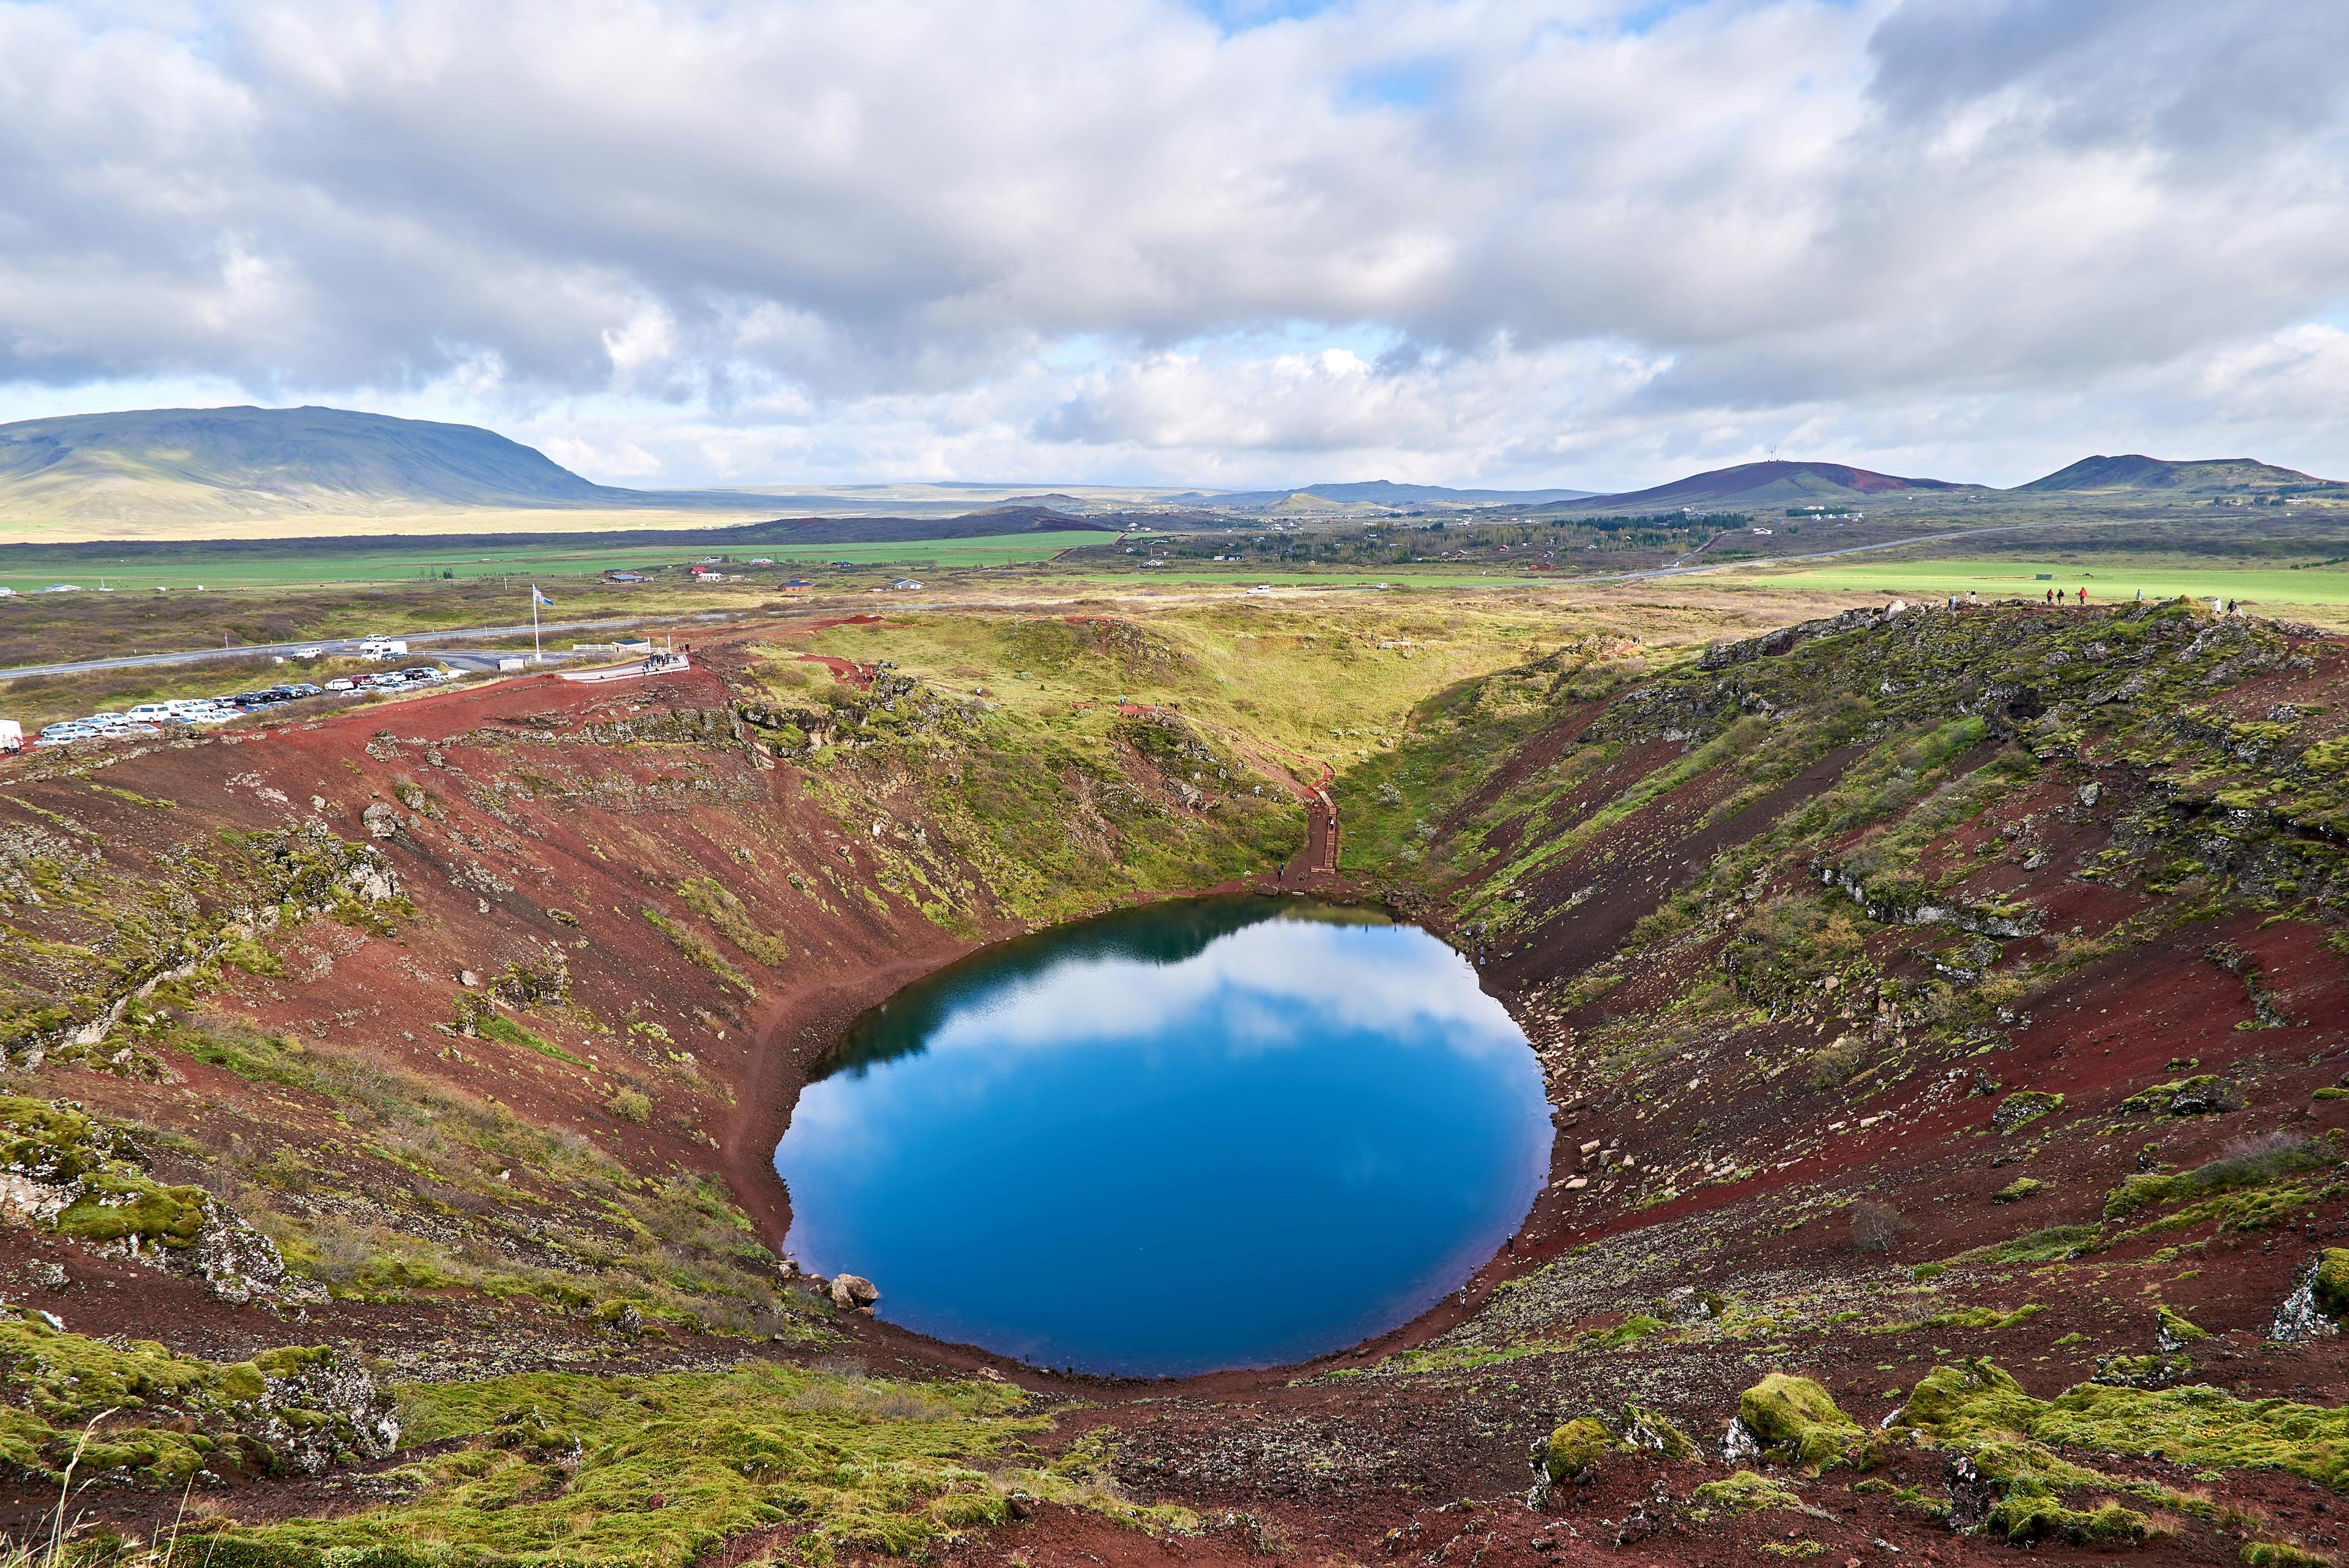 A vibrant blue volcanic crater lake nestled within a rich, red-earthed depression, with a panoramic view of the expansive, green Icelandic landscape under a cloud-strewn sky.